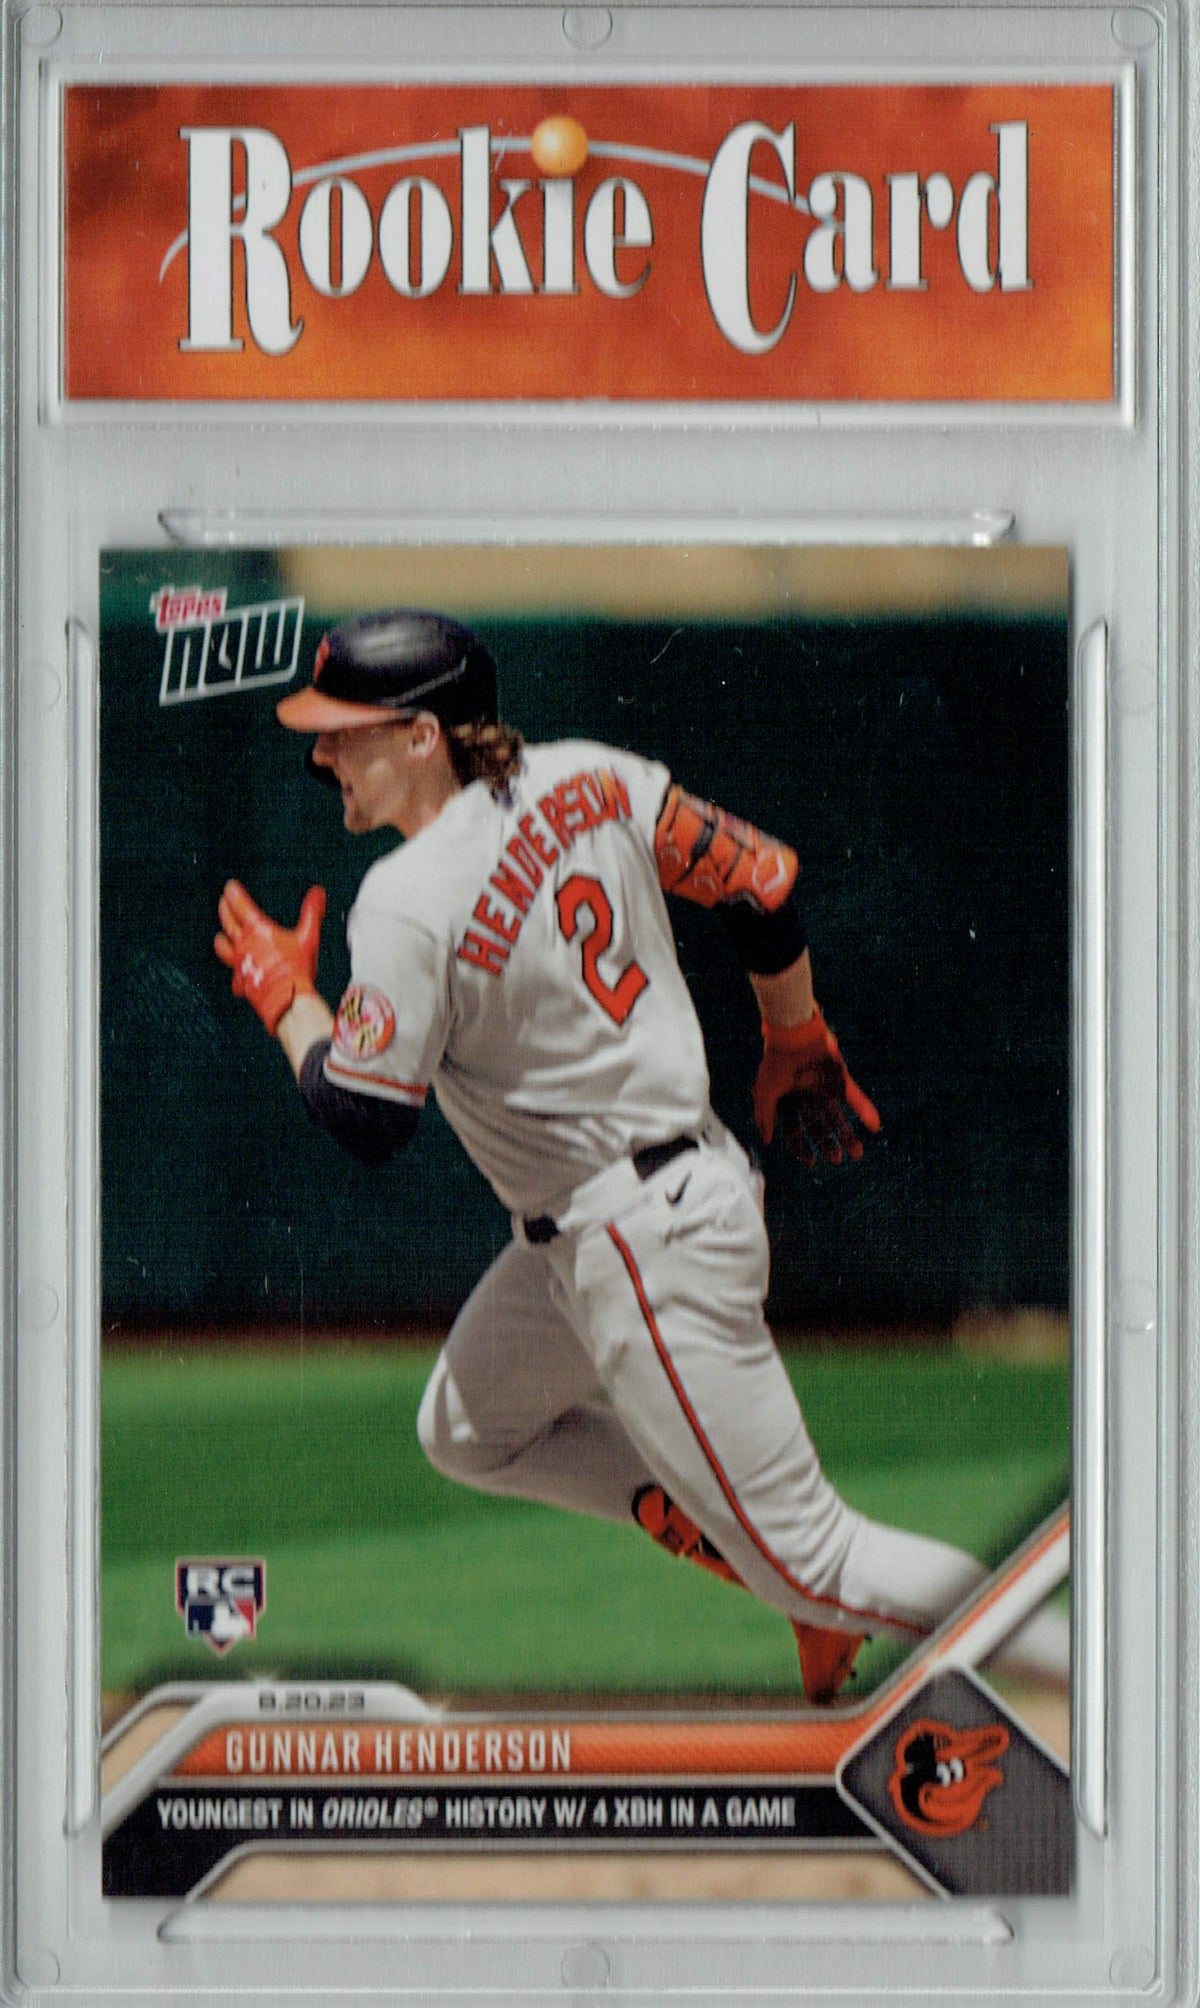 Giancarlo Mike Stanton 2010 Topps Rookie Debut Card